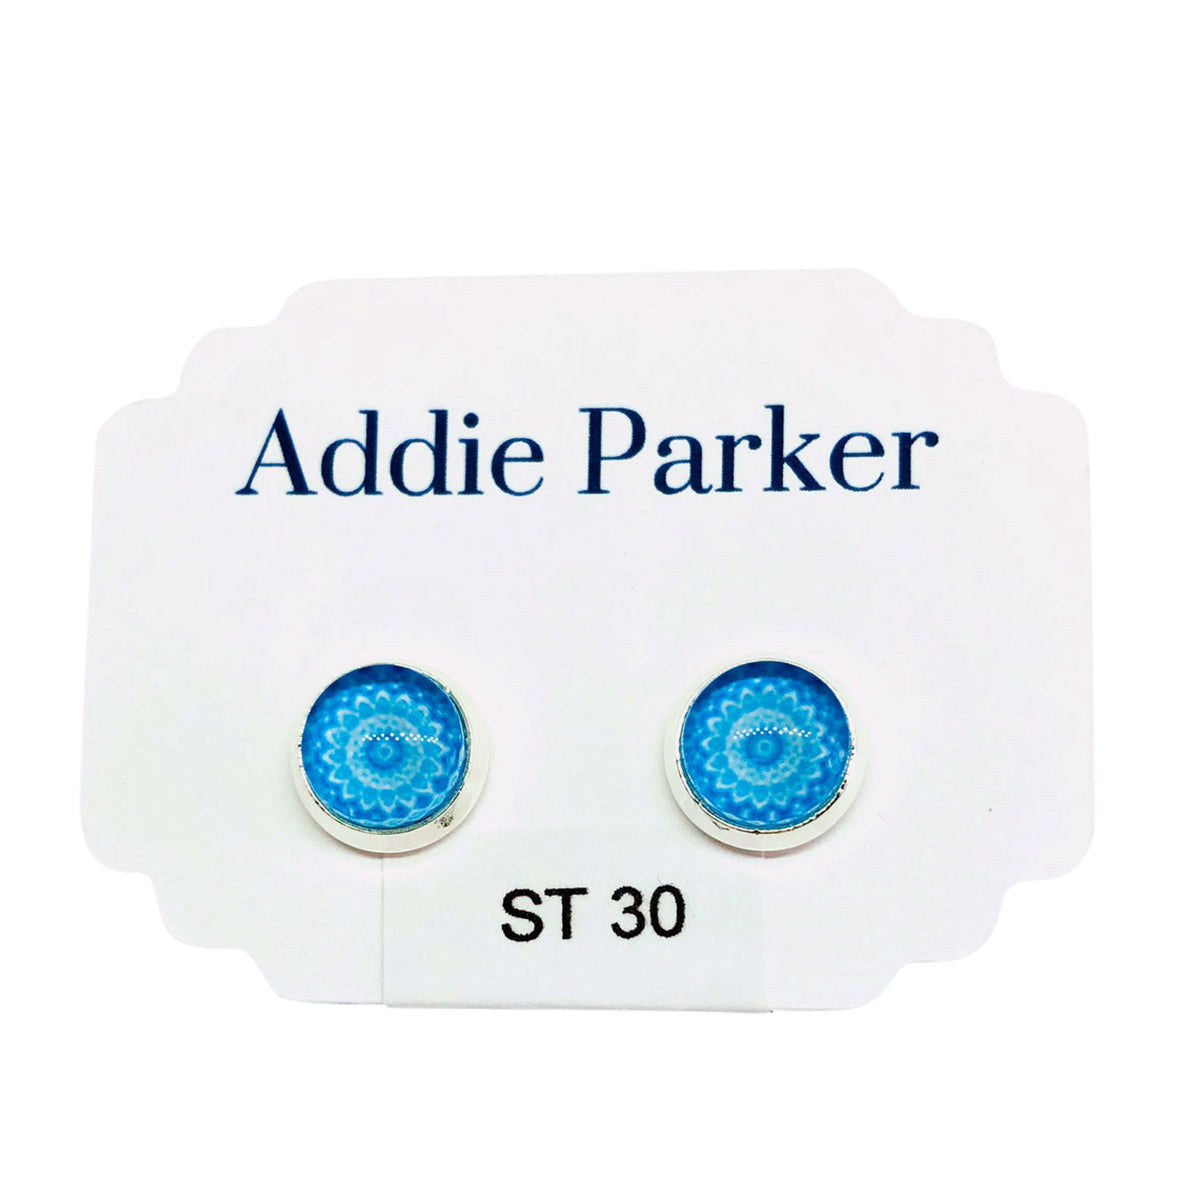 ADDIE PARKER STUD EARRINGS BLUE MANDALA with a lever back closure displayed on a white earring card labeled &quot;Addie Parker.